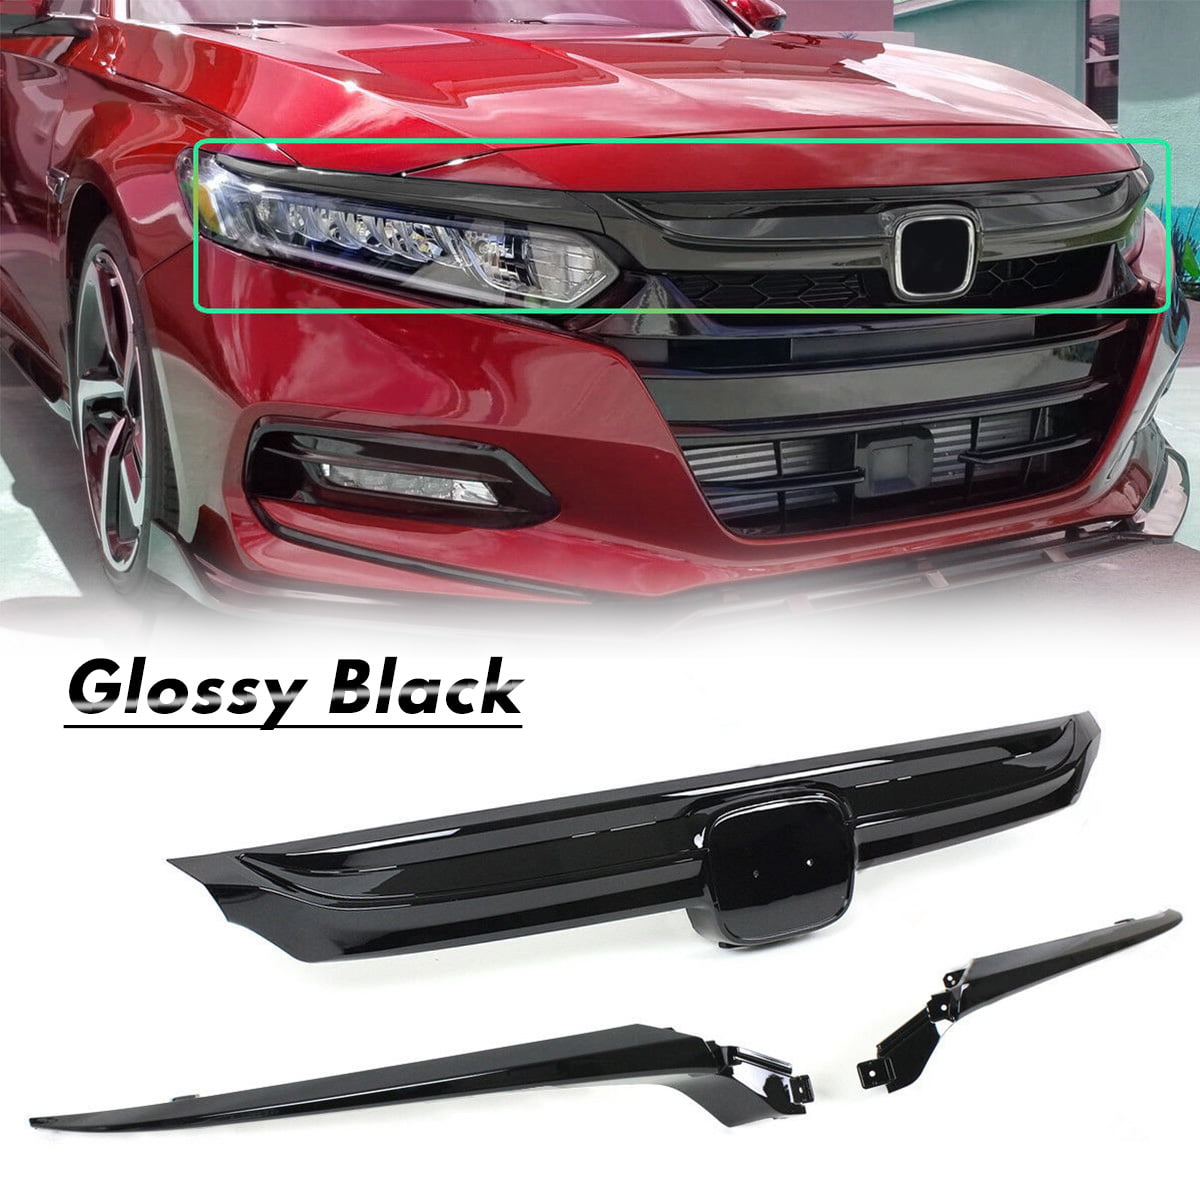 FOR 2016-2019 HONDA CIVIC 10TH GEN GLOSS BLK JDM BATTLE STYLE FRONT HOOD GRILLE